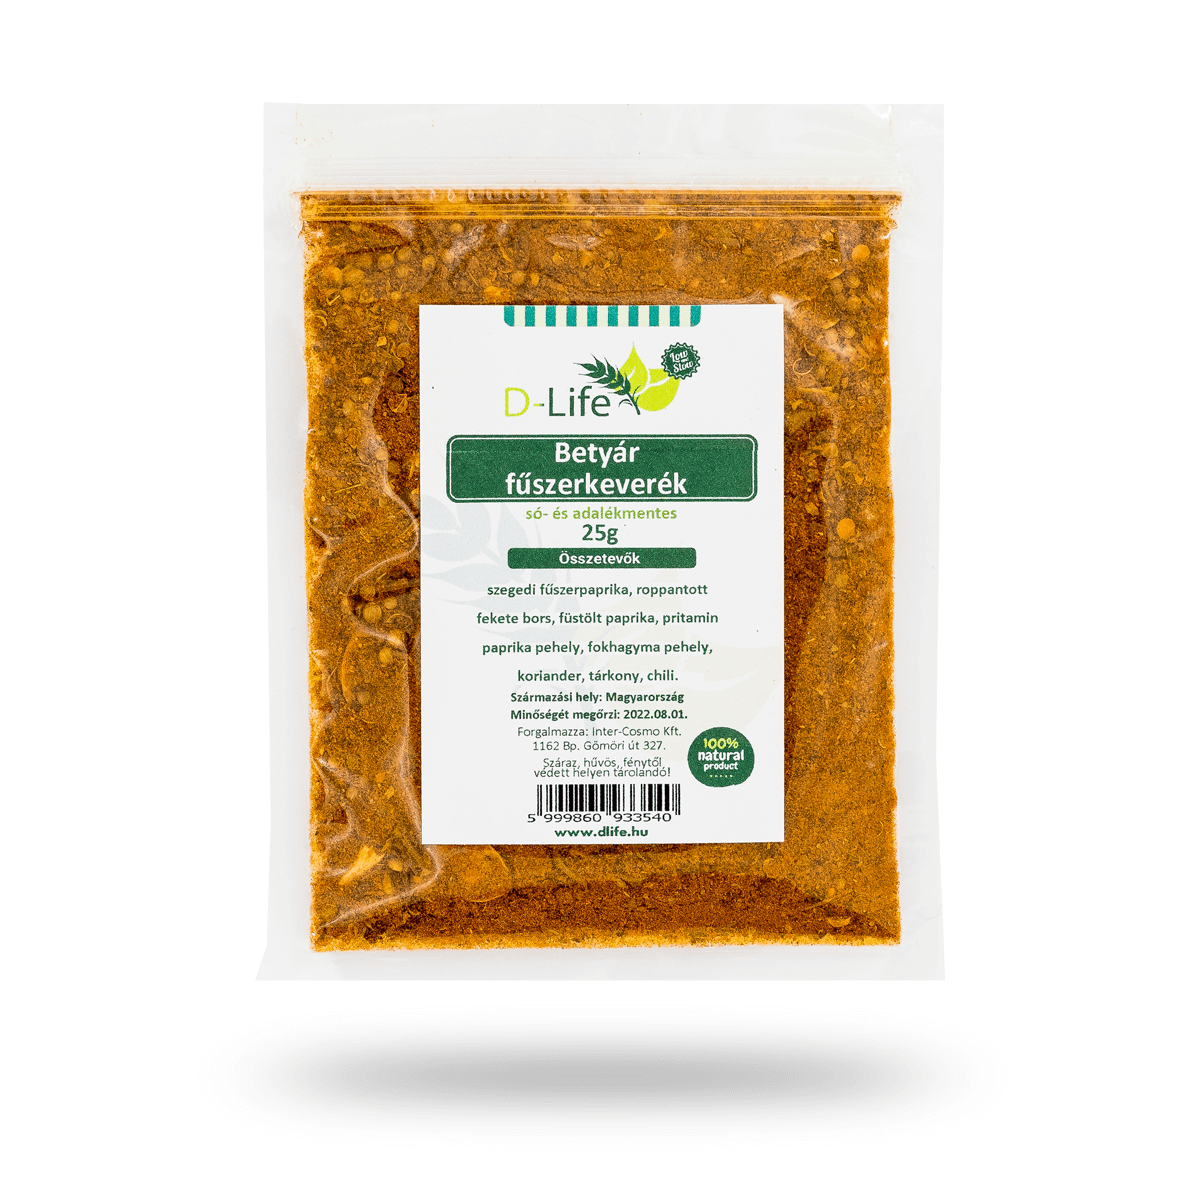 Outlaw spice mix